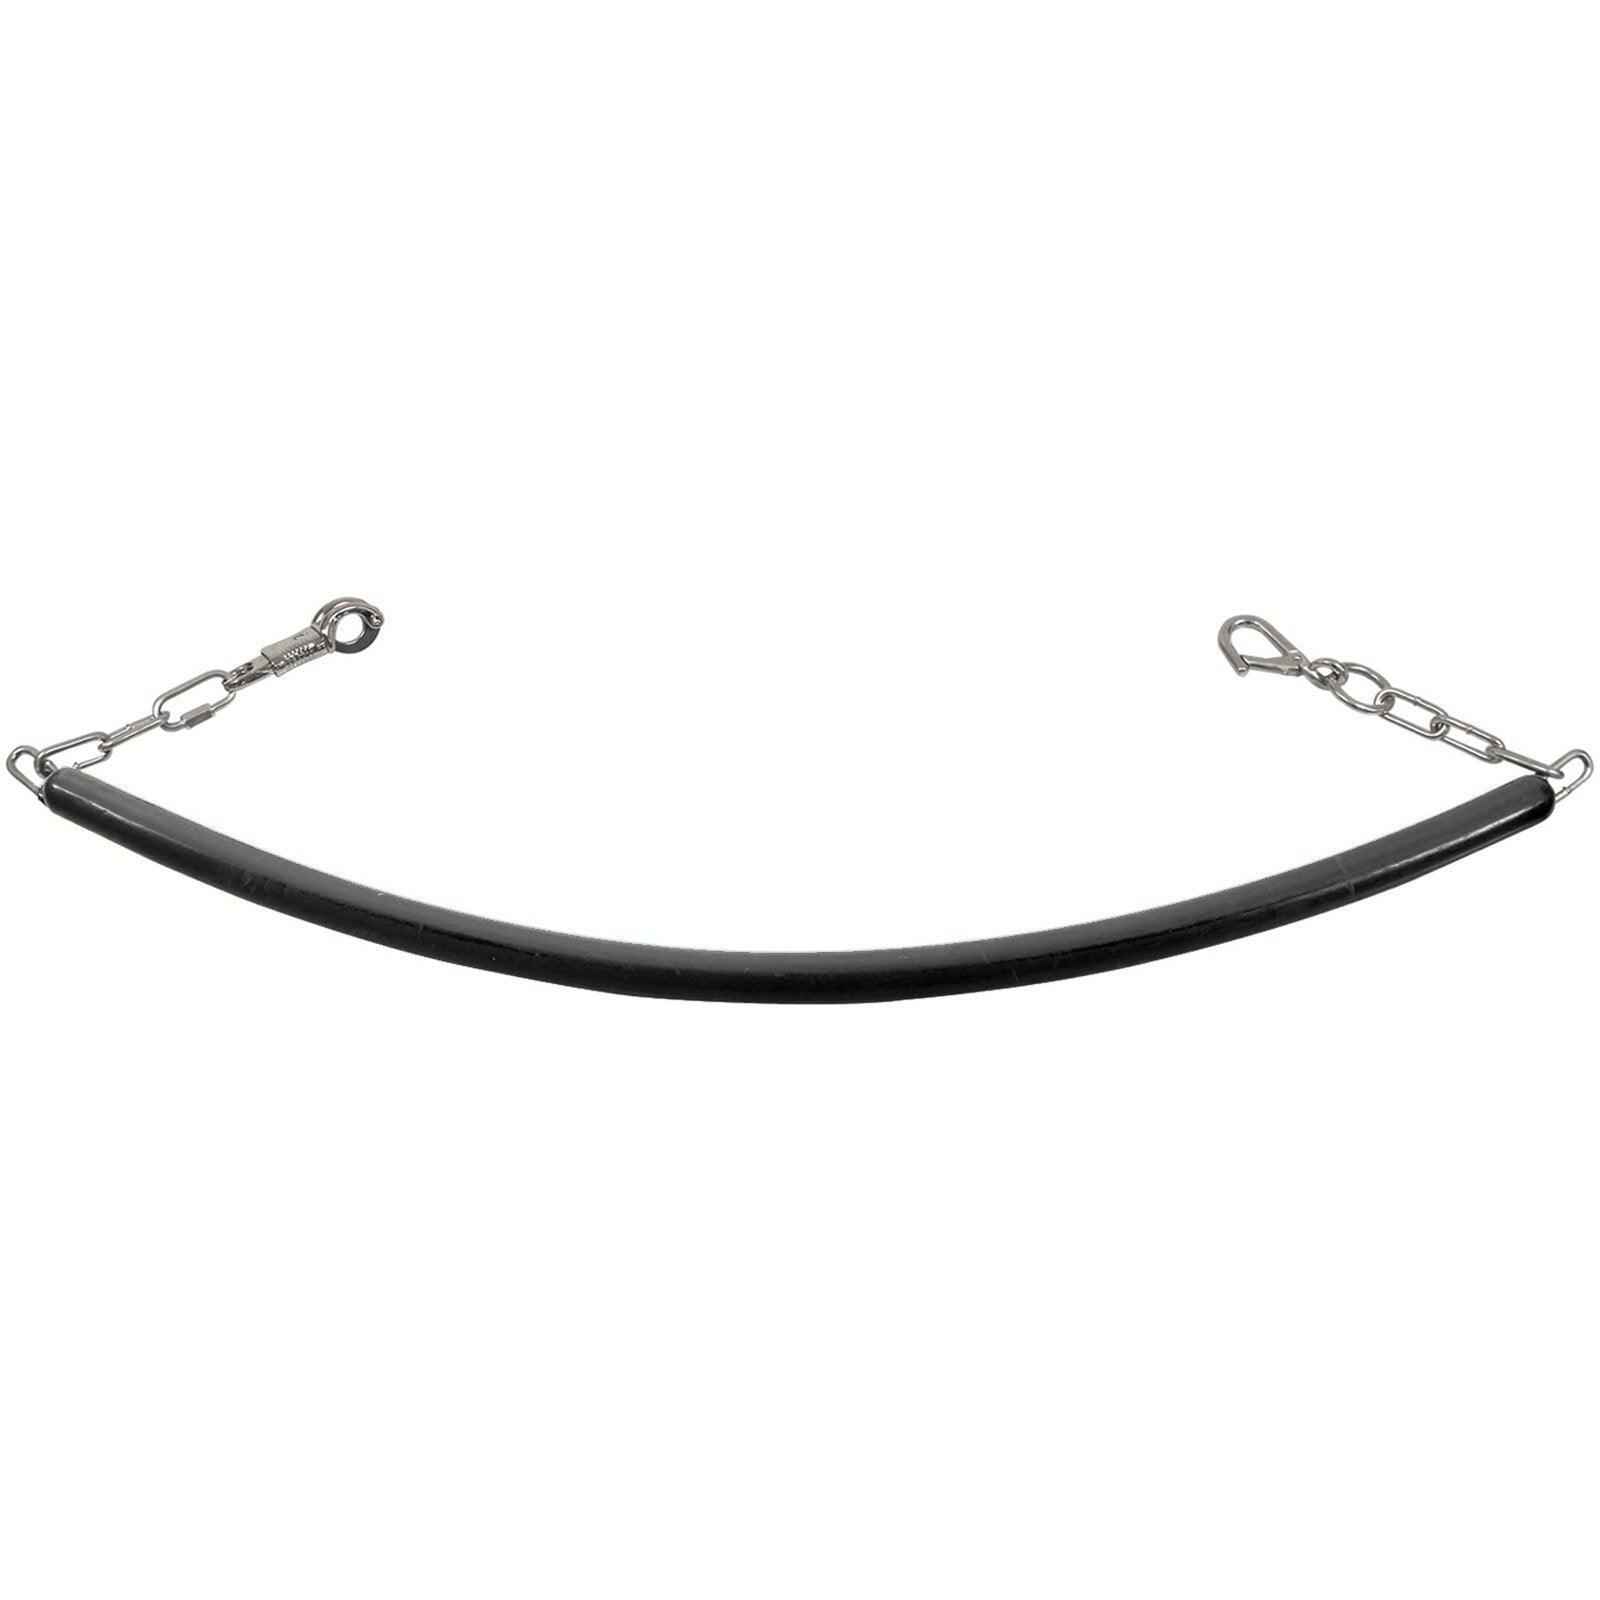 Rubber Stall Chain with Clips - North East Pet Shop Equine